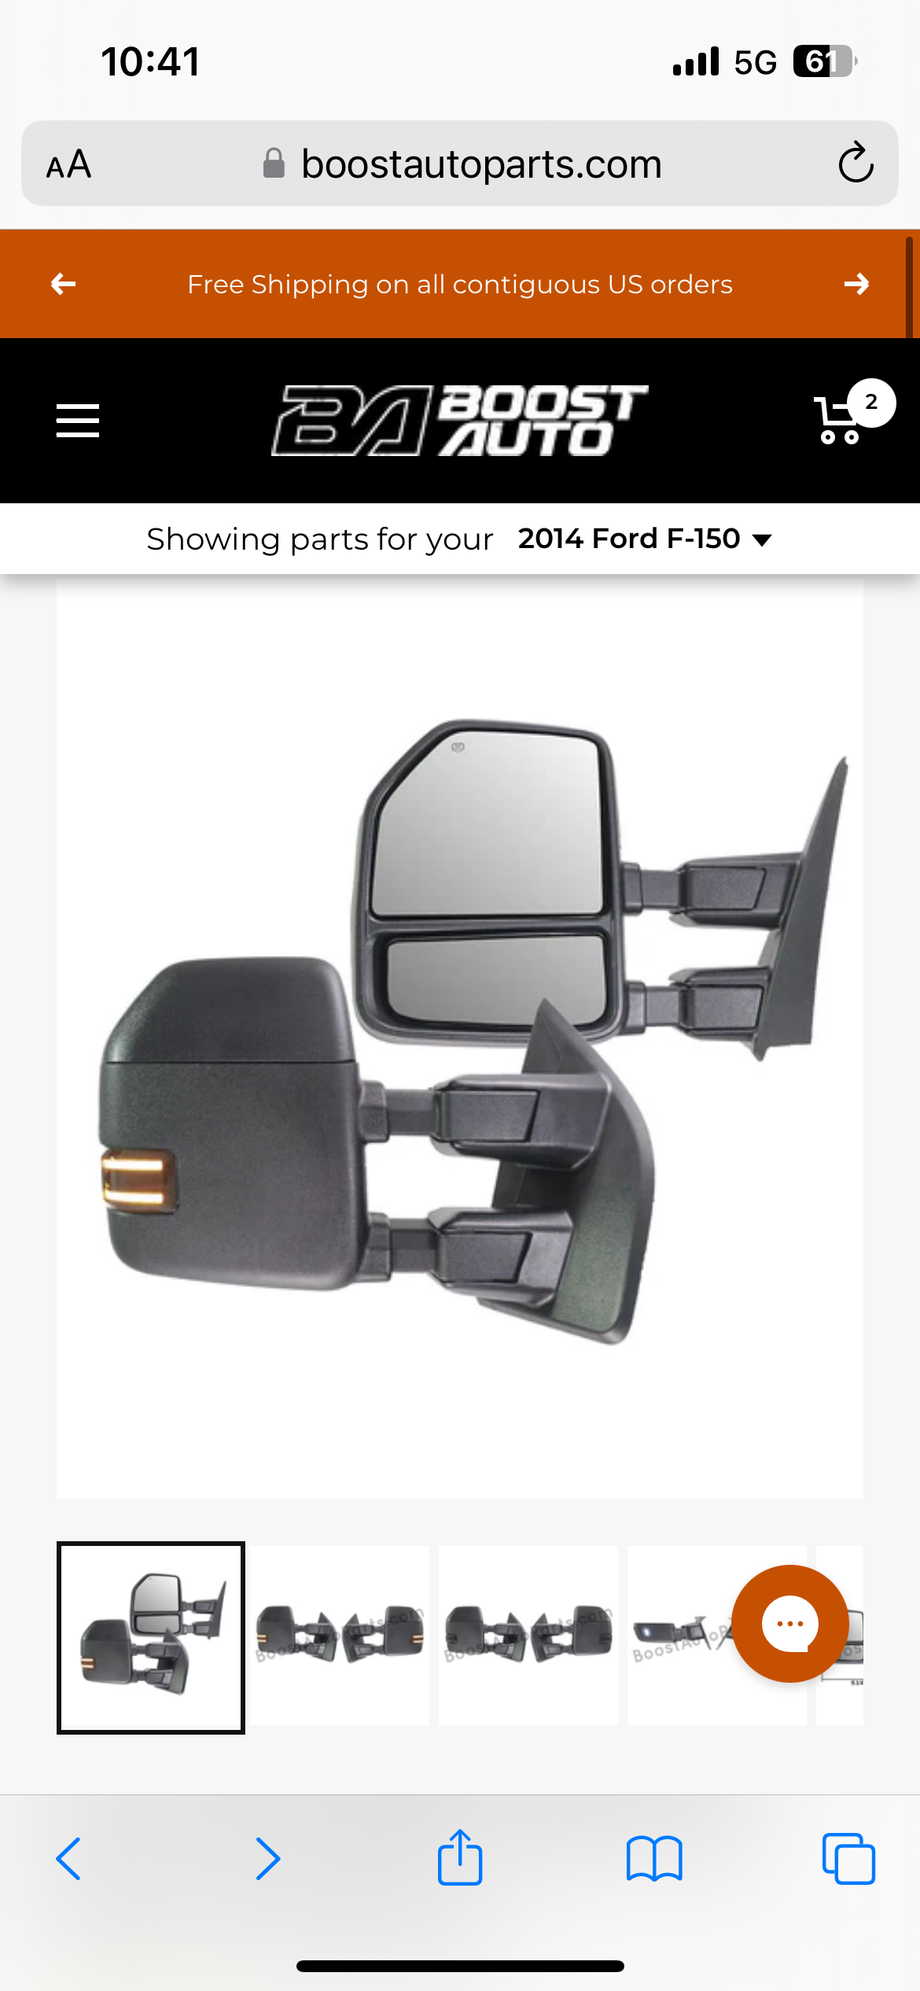 Exterior Body Parts - Boost Mirrors - Used - 2008 to 2014 Ford F-150 - Severna Park, MD 21146, United States